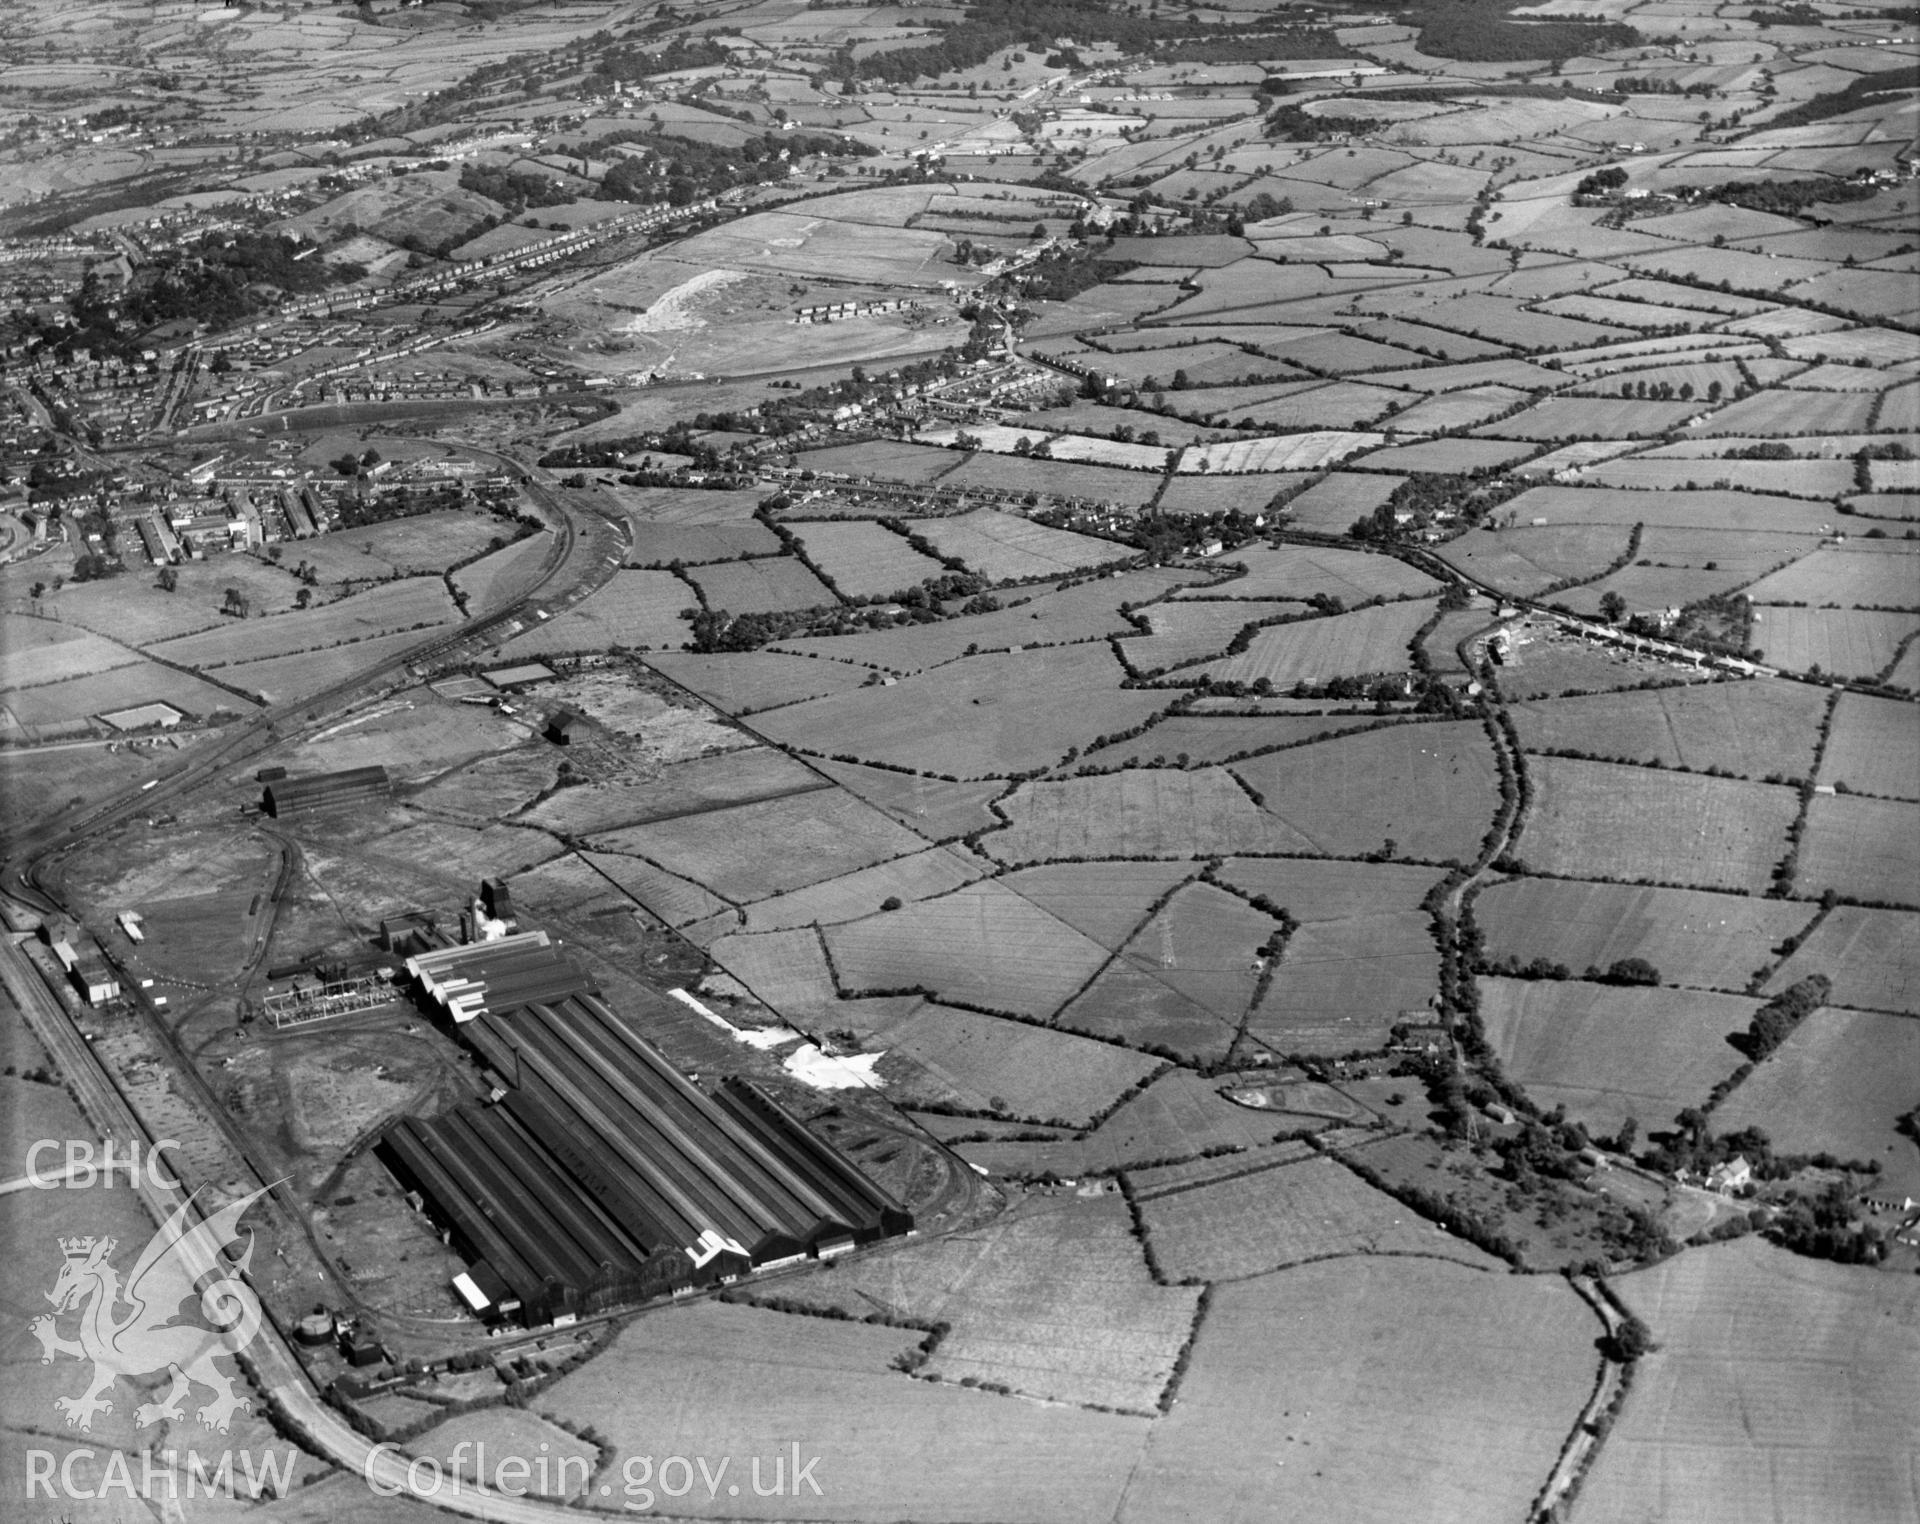 View of Orb Steelworks and Newport Tubeworks, Newport, oblique aerial view. 5?x4? black and white glass plate negative.